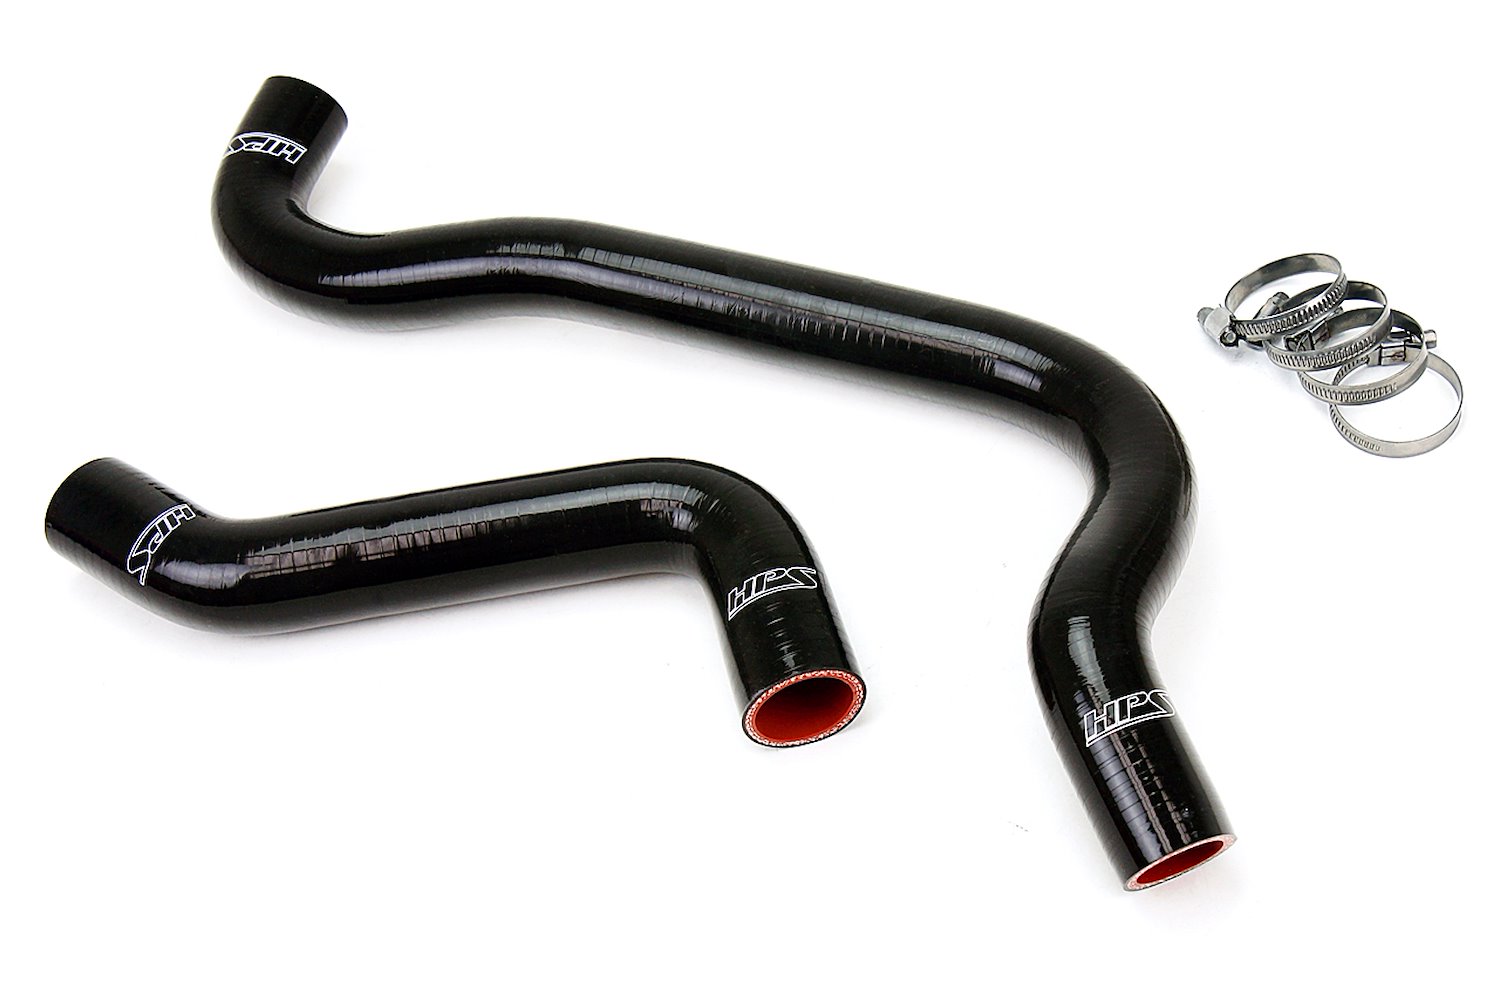 57-1009-BLK Radiator Hose Kit, High-Temp 3-Ply Reinforced Silicone, Replace OEM Rubber Radiator Coolant Hoses